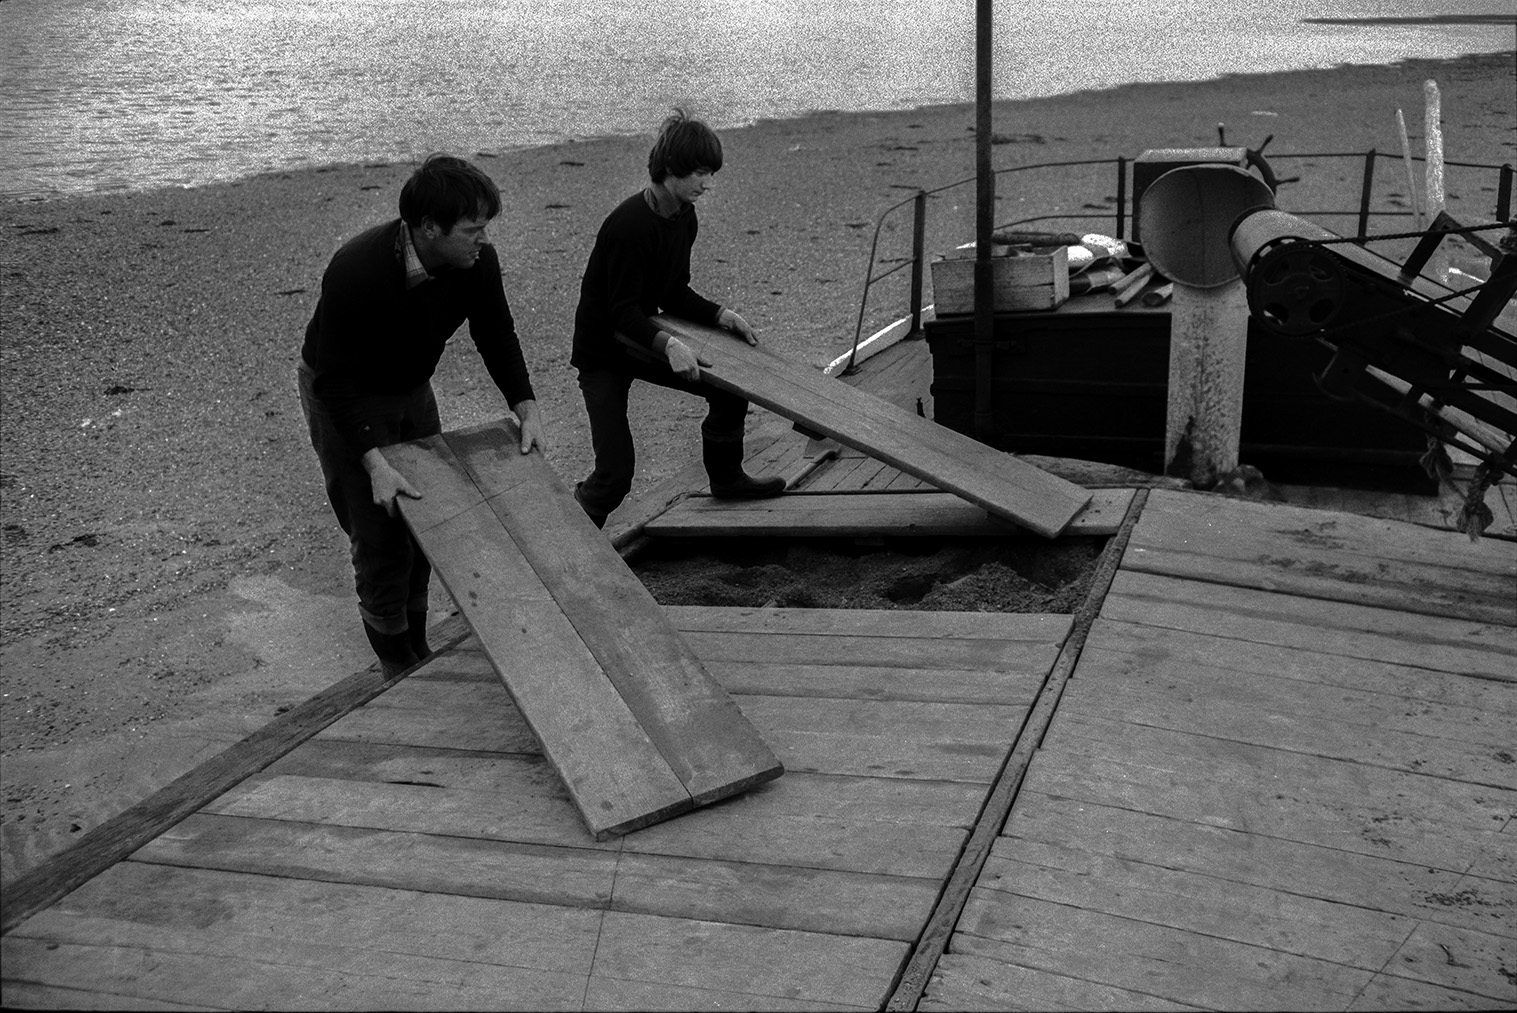 Two men covering a full sand barge with wooden planks on the beach at Crow Point, Braunton. The man on the left may be John Daniel.